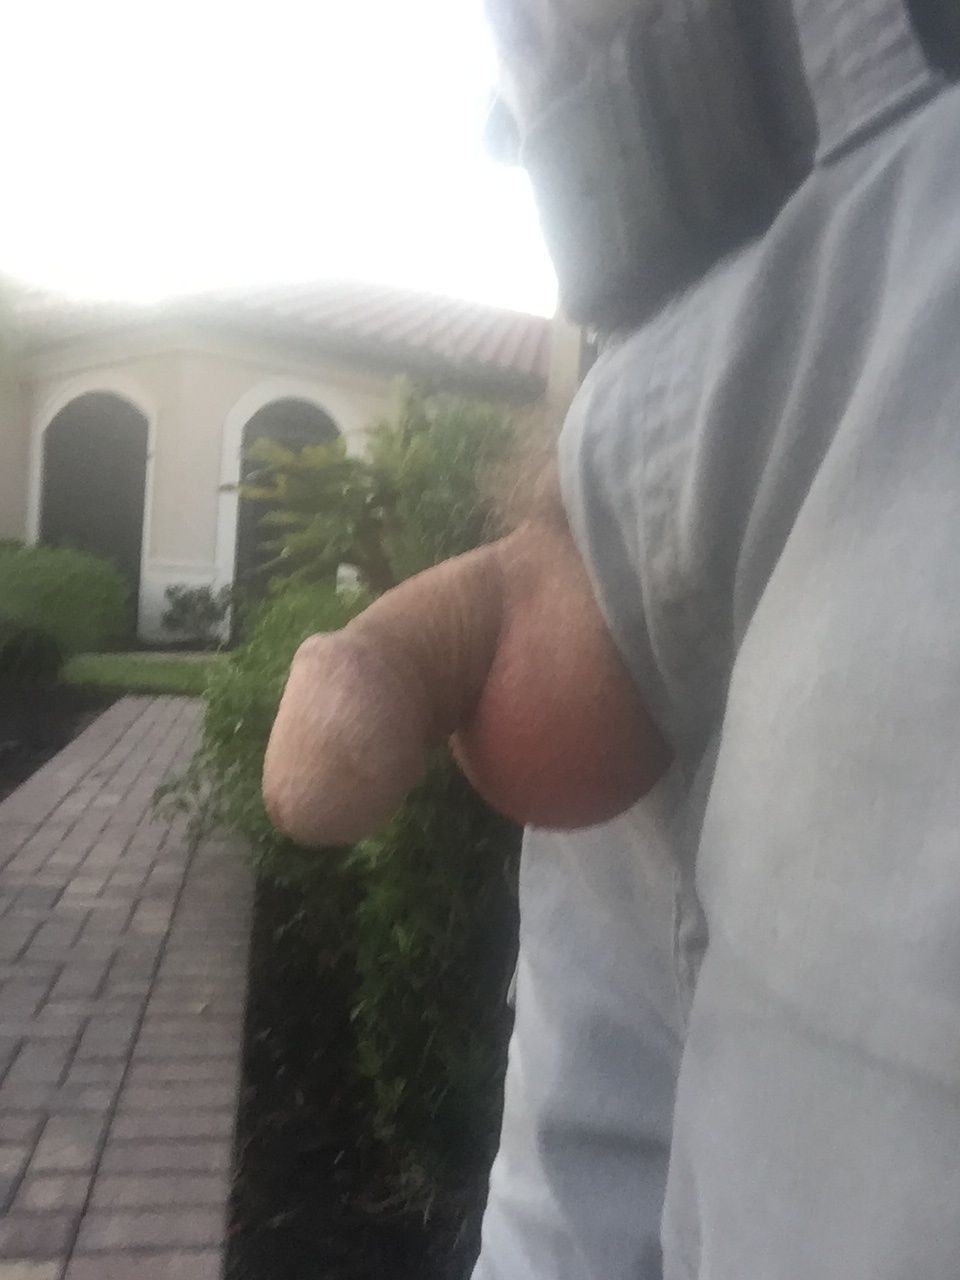 Penis flash for the neighbors